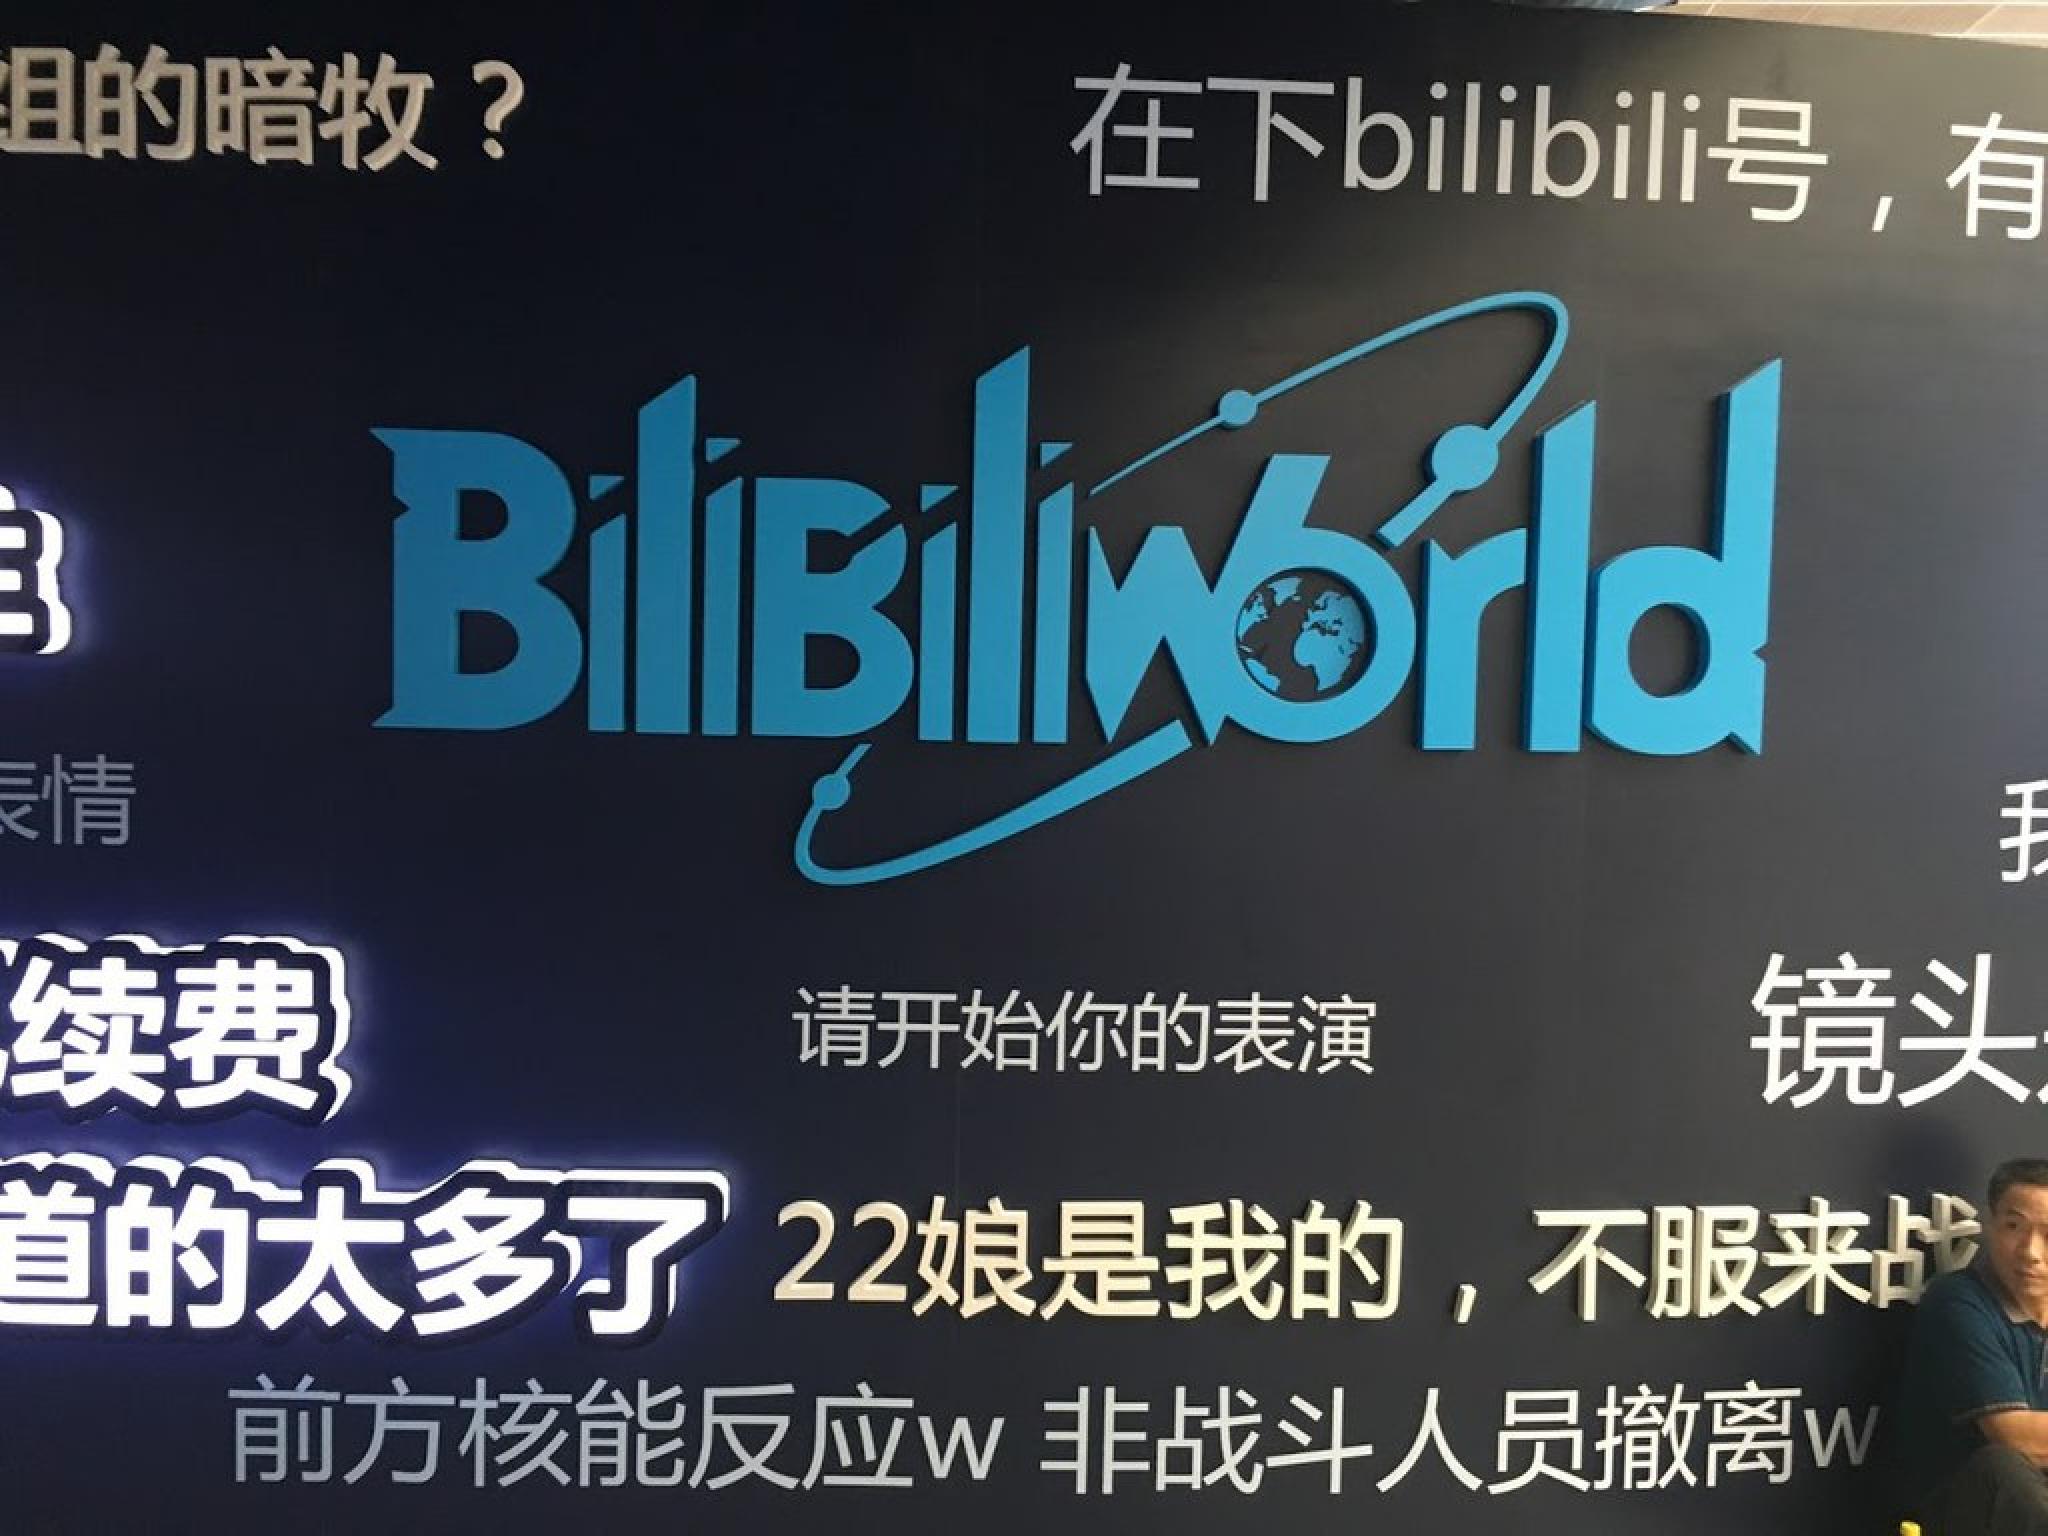  bilibili-gains-analyst-praise-for-advertising-growth-despite-gaming-sector-headwinds 